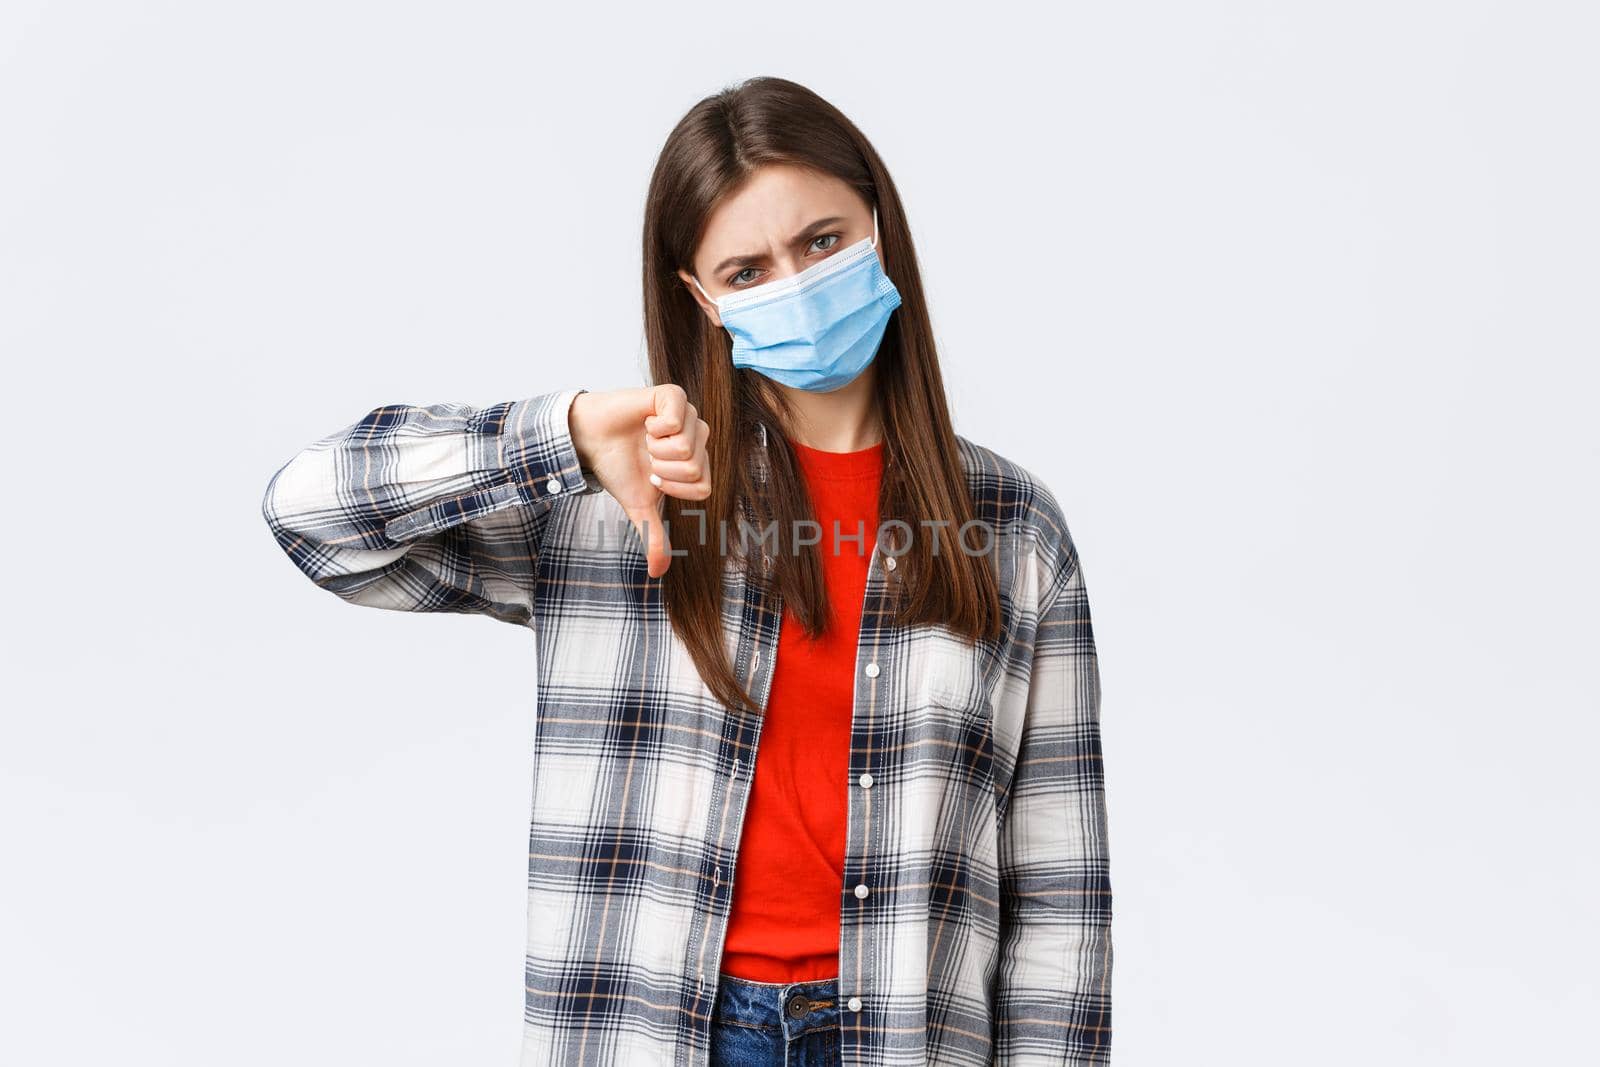 Coronavirus outbreak, leisure on quarantine, social distancing and emotions concept. Lame bad idea. Displeased and unamused young woman in medical mask thumb-down in disapproval.